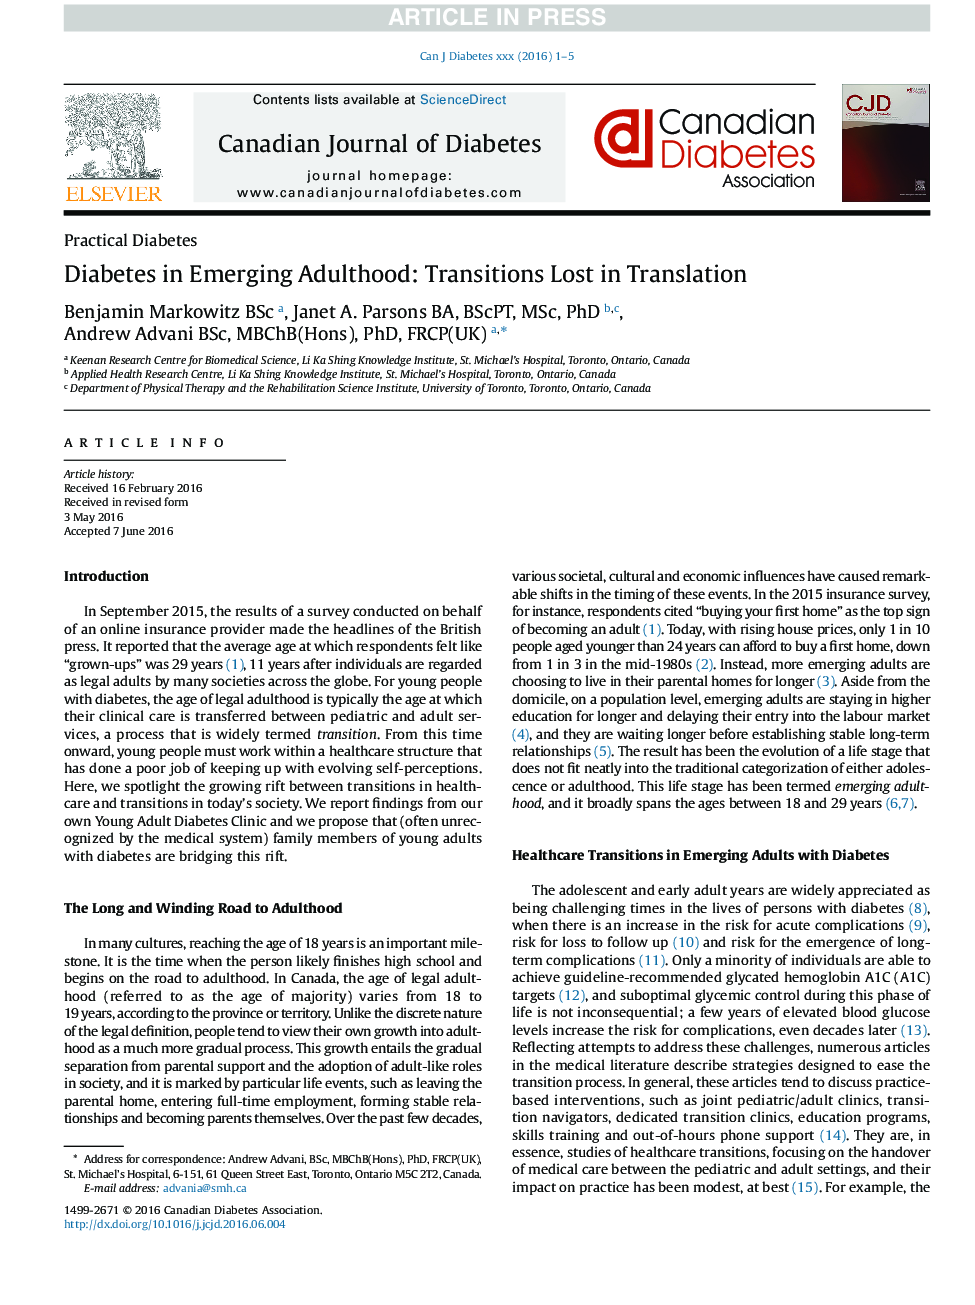 Diabetes in Emerging Adulthood: Transitions Lost in Translation